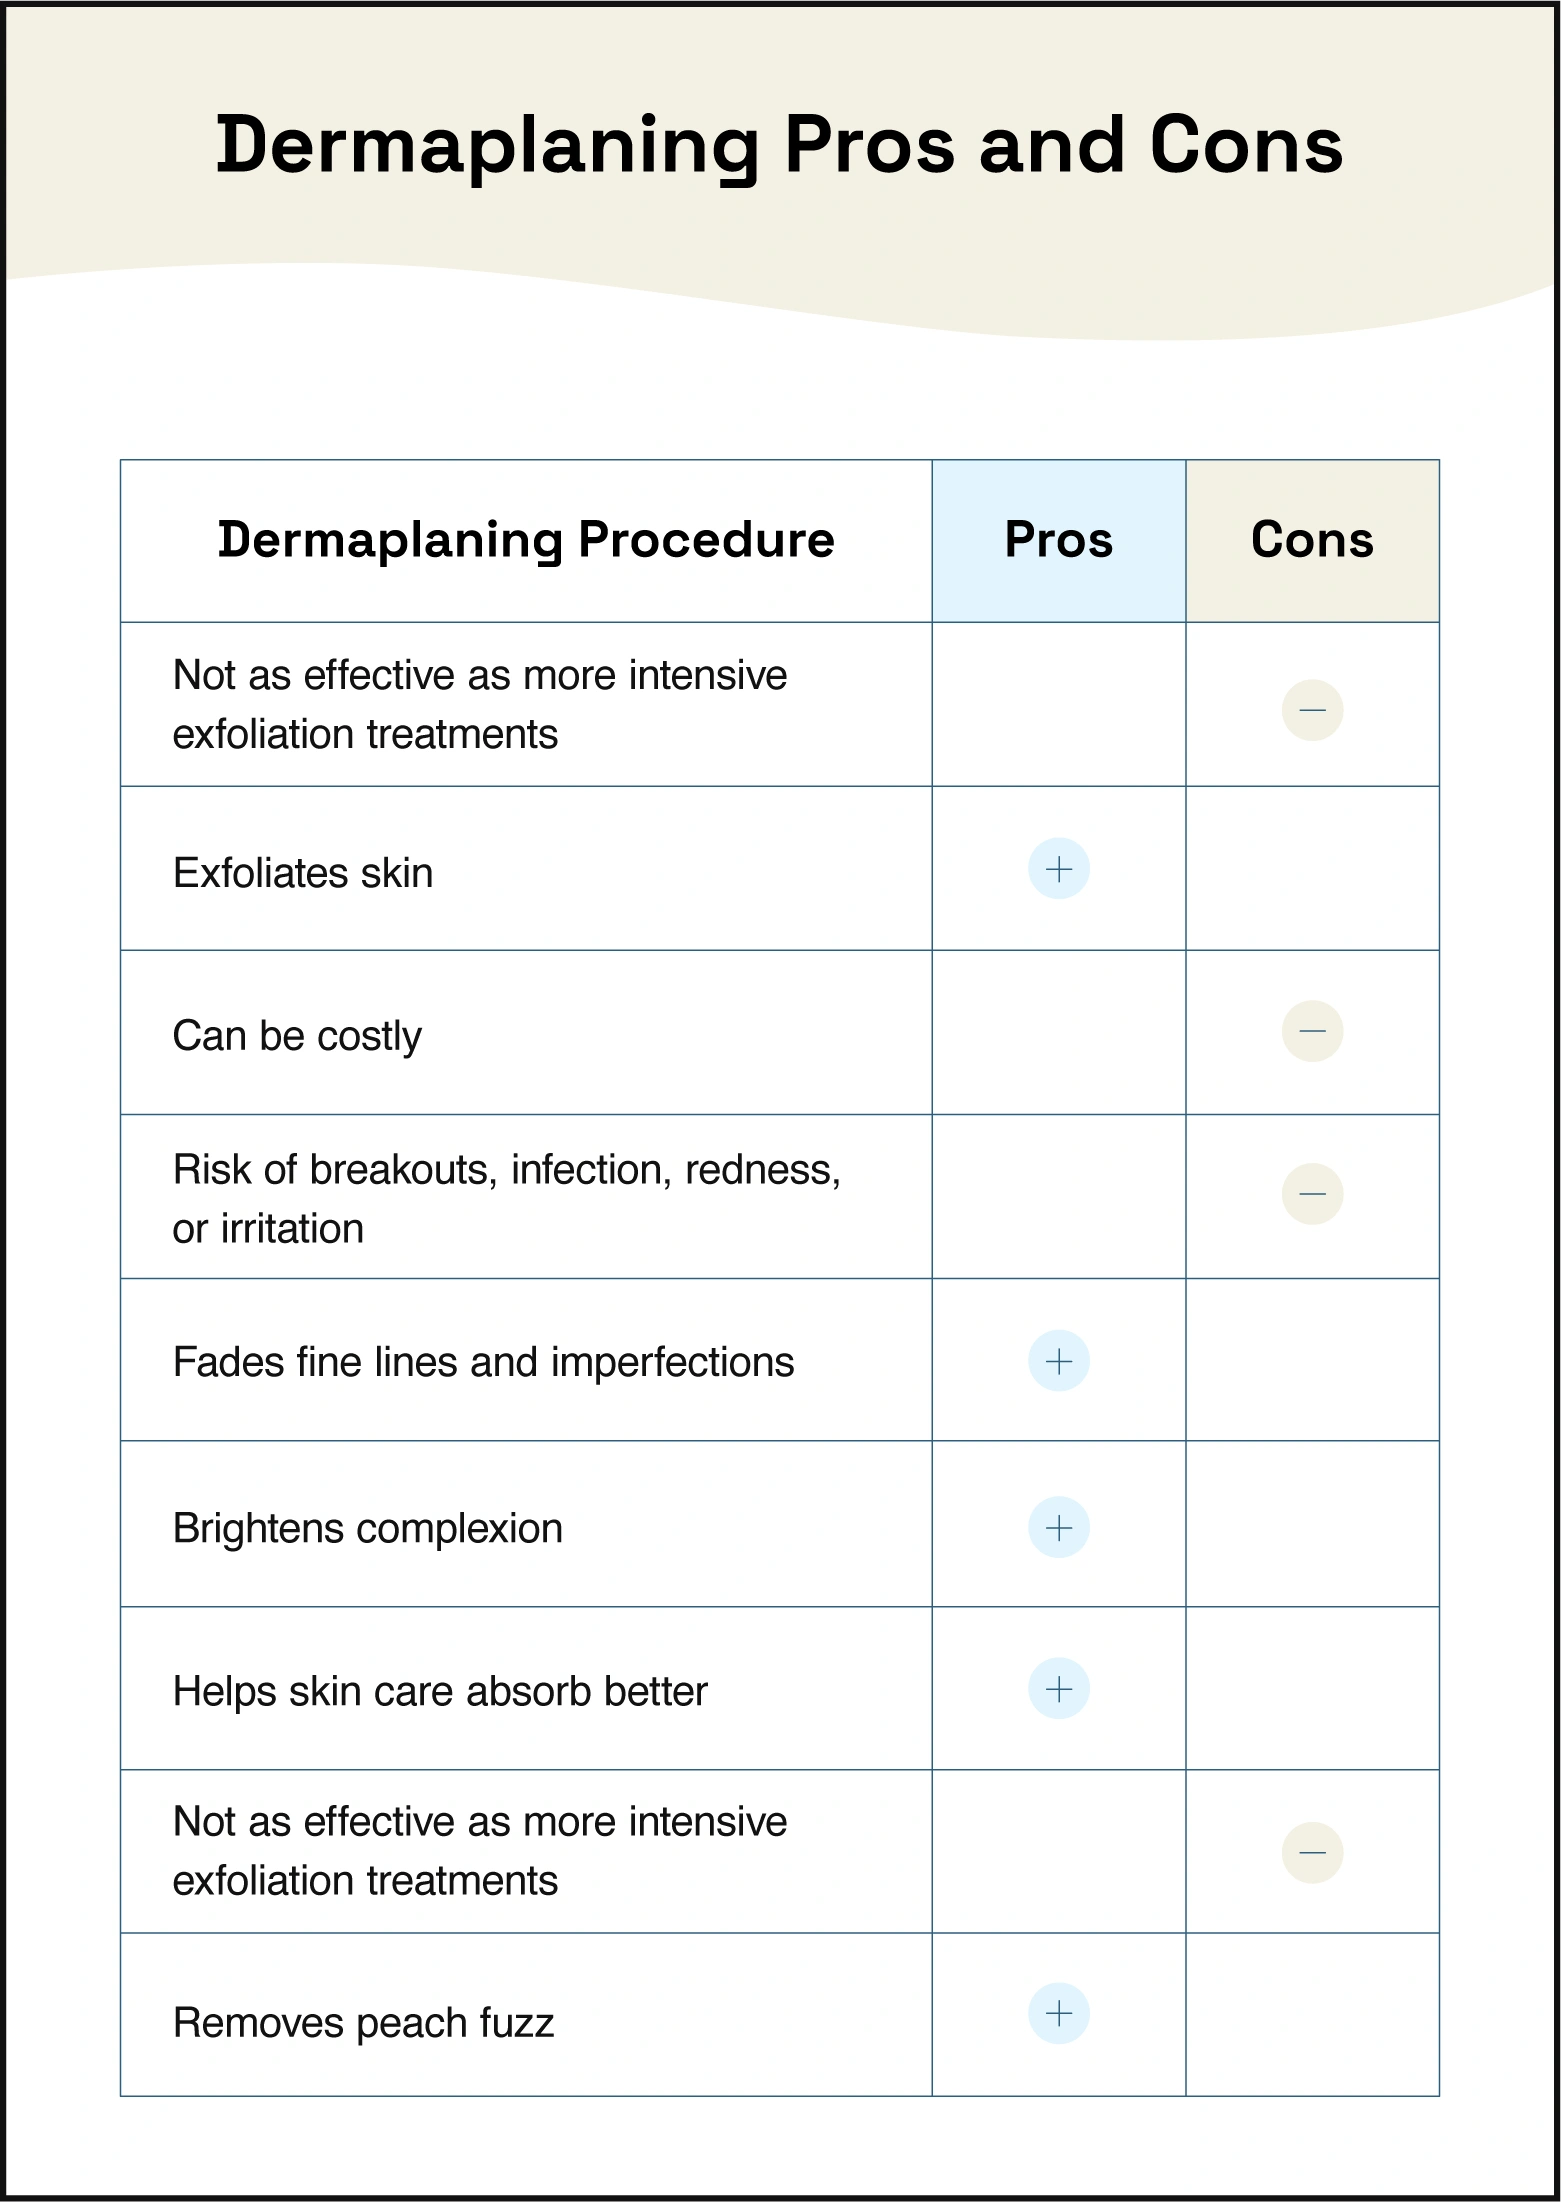 Image outlines the pros and cons of dermaplaning.